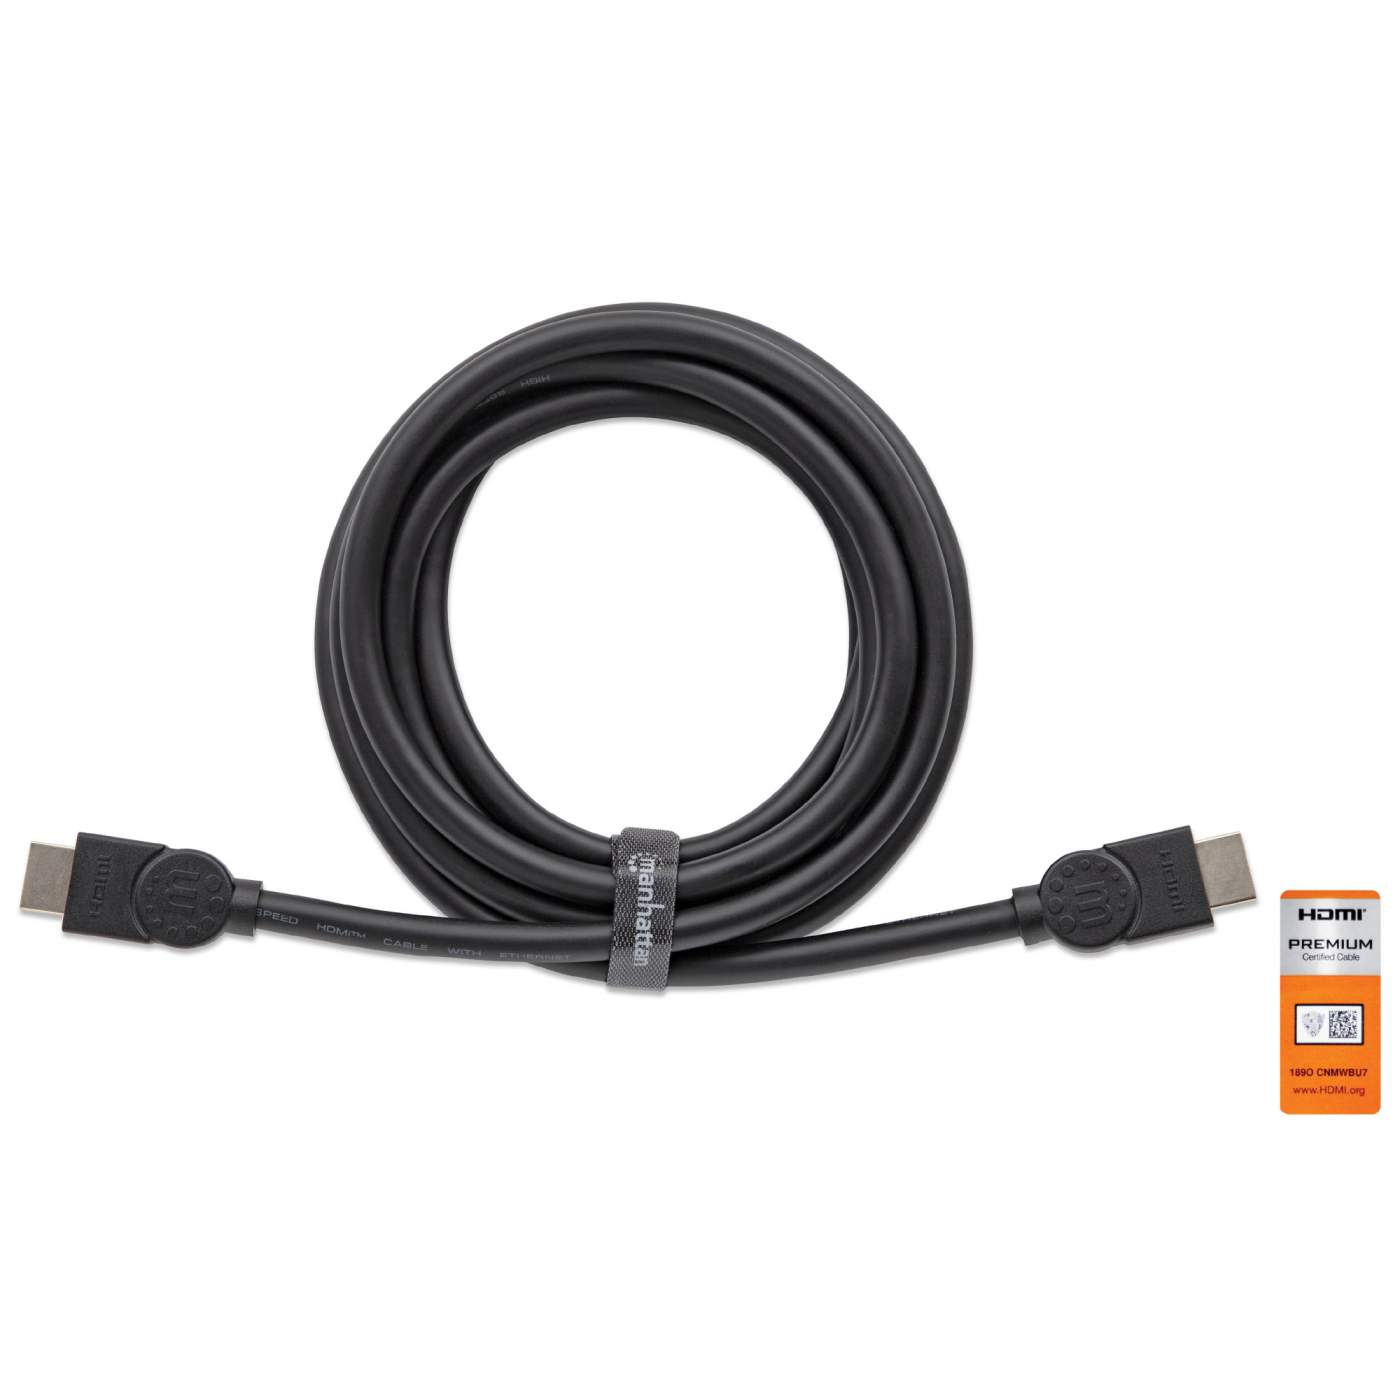 Certified Premium High Speed HDMI Cable with Ethernet Image 4